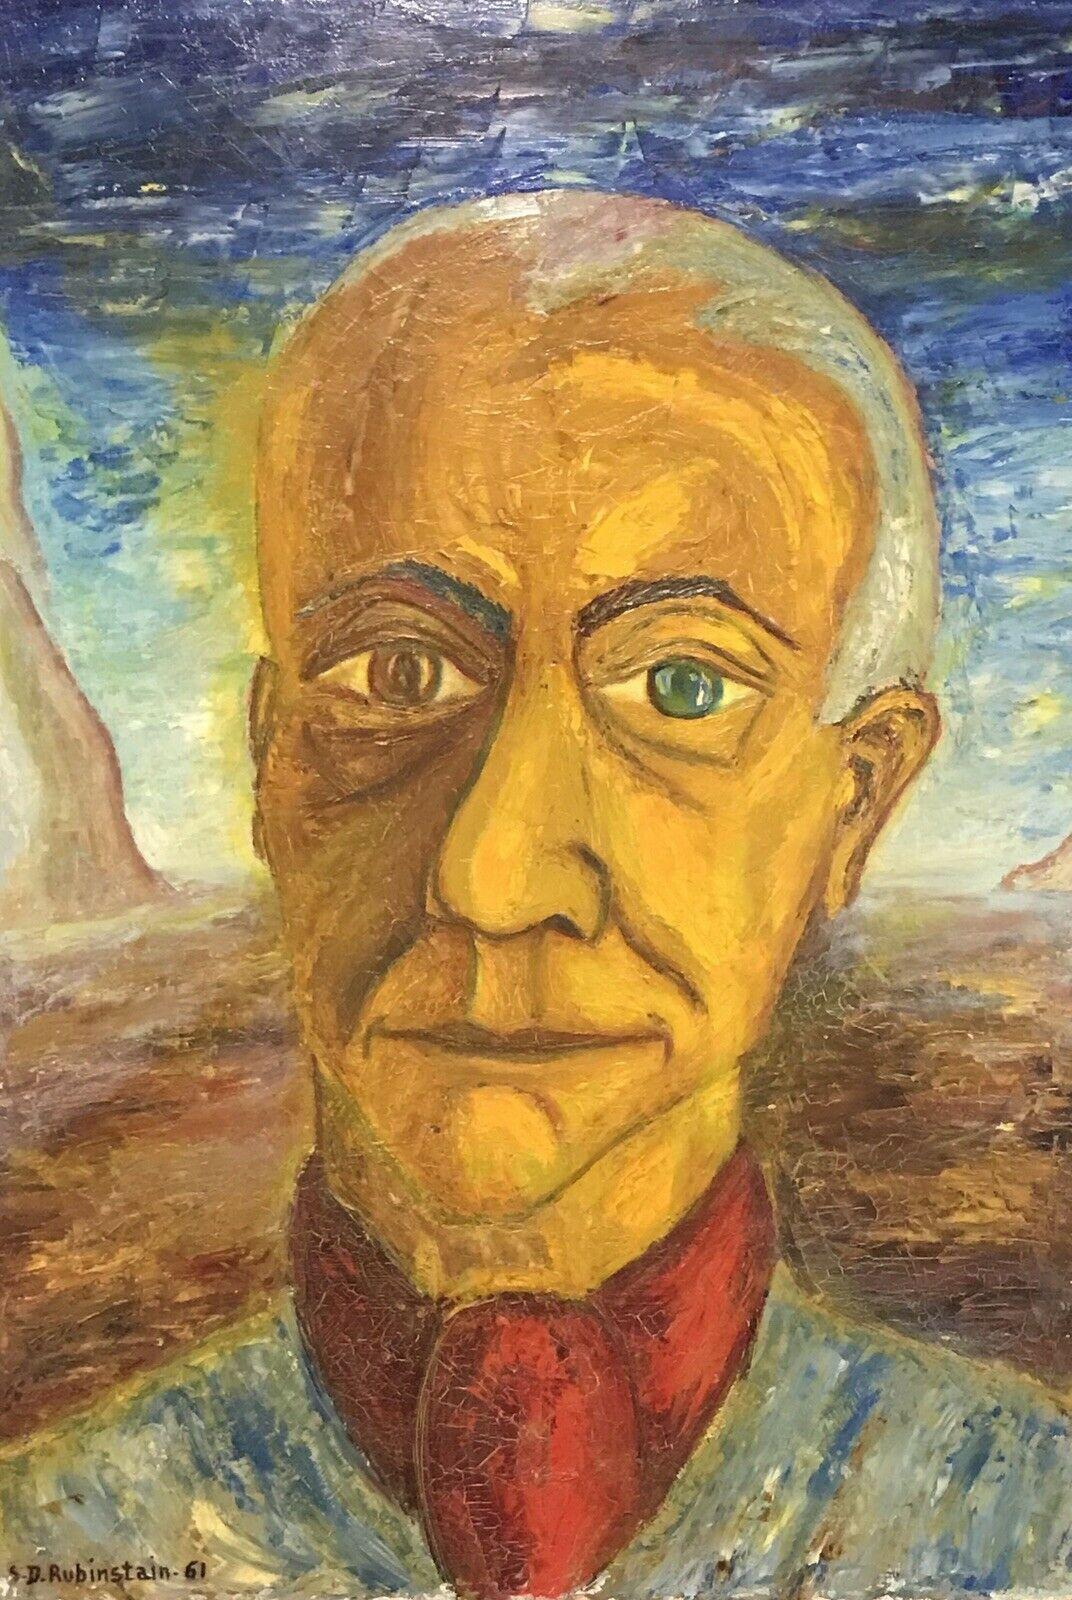 Sophie Danielle Rubinstain Abstract Painting - SOPHIE DANIELLE RUBINSTAIN (1922-2018) HUGE 1960s FRENCH SURREALIST PORTRAIT MAN